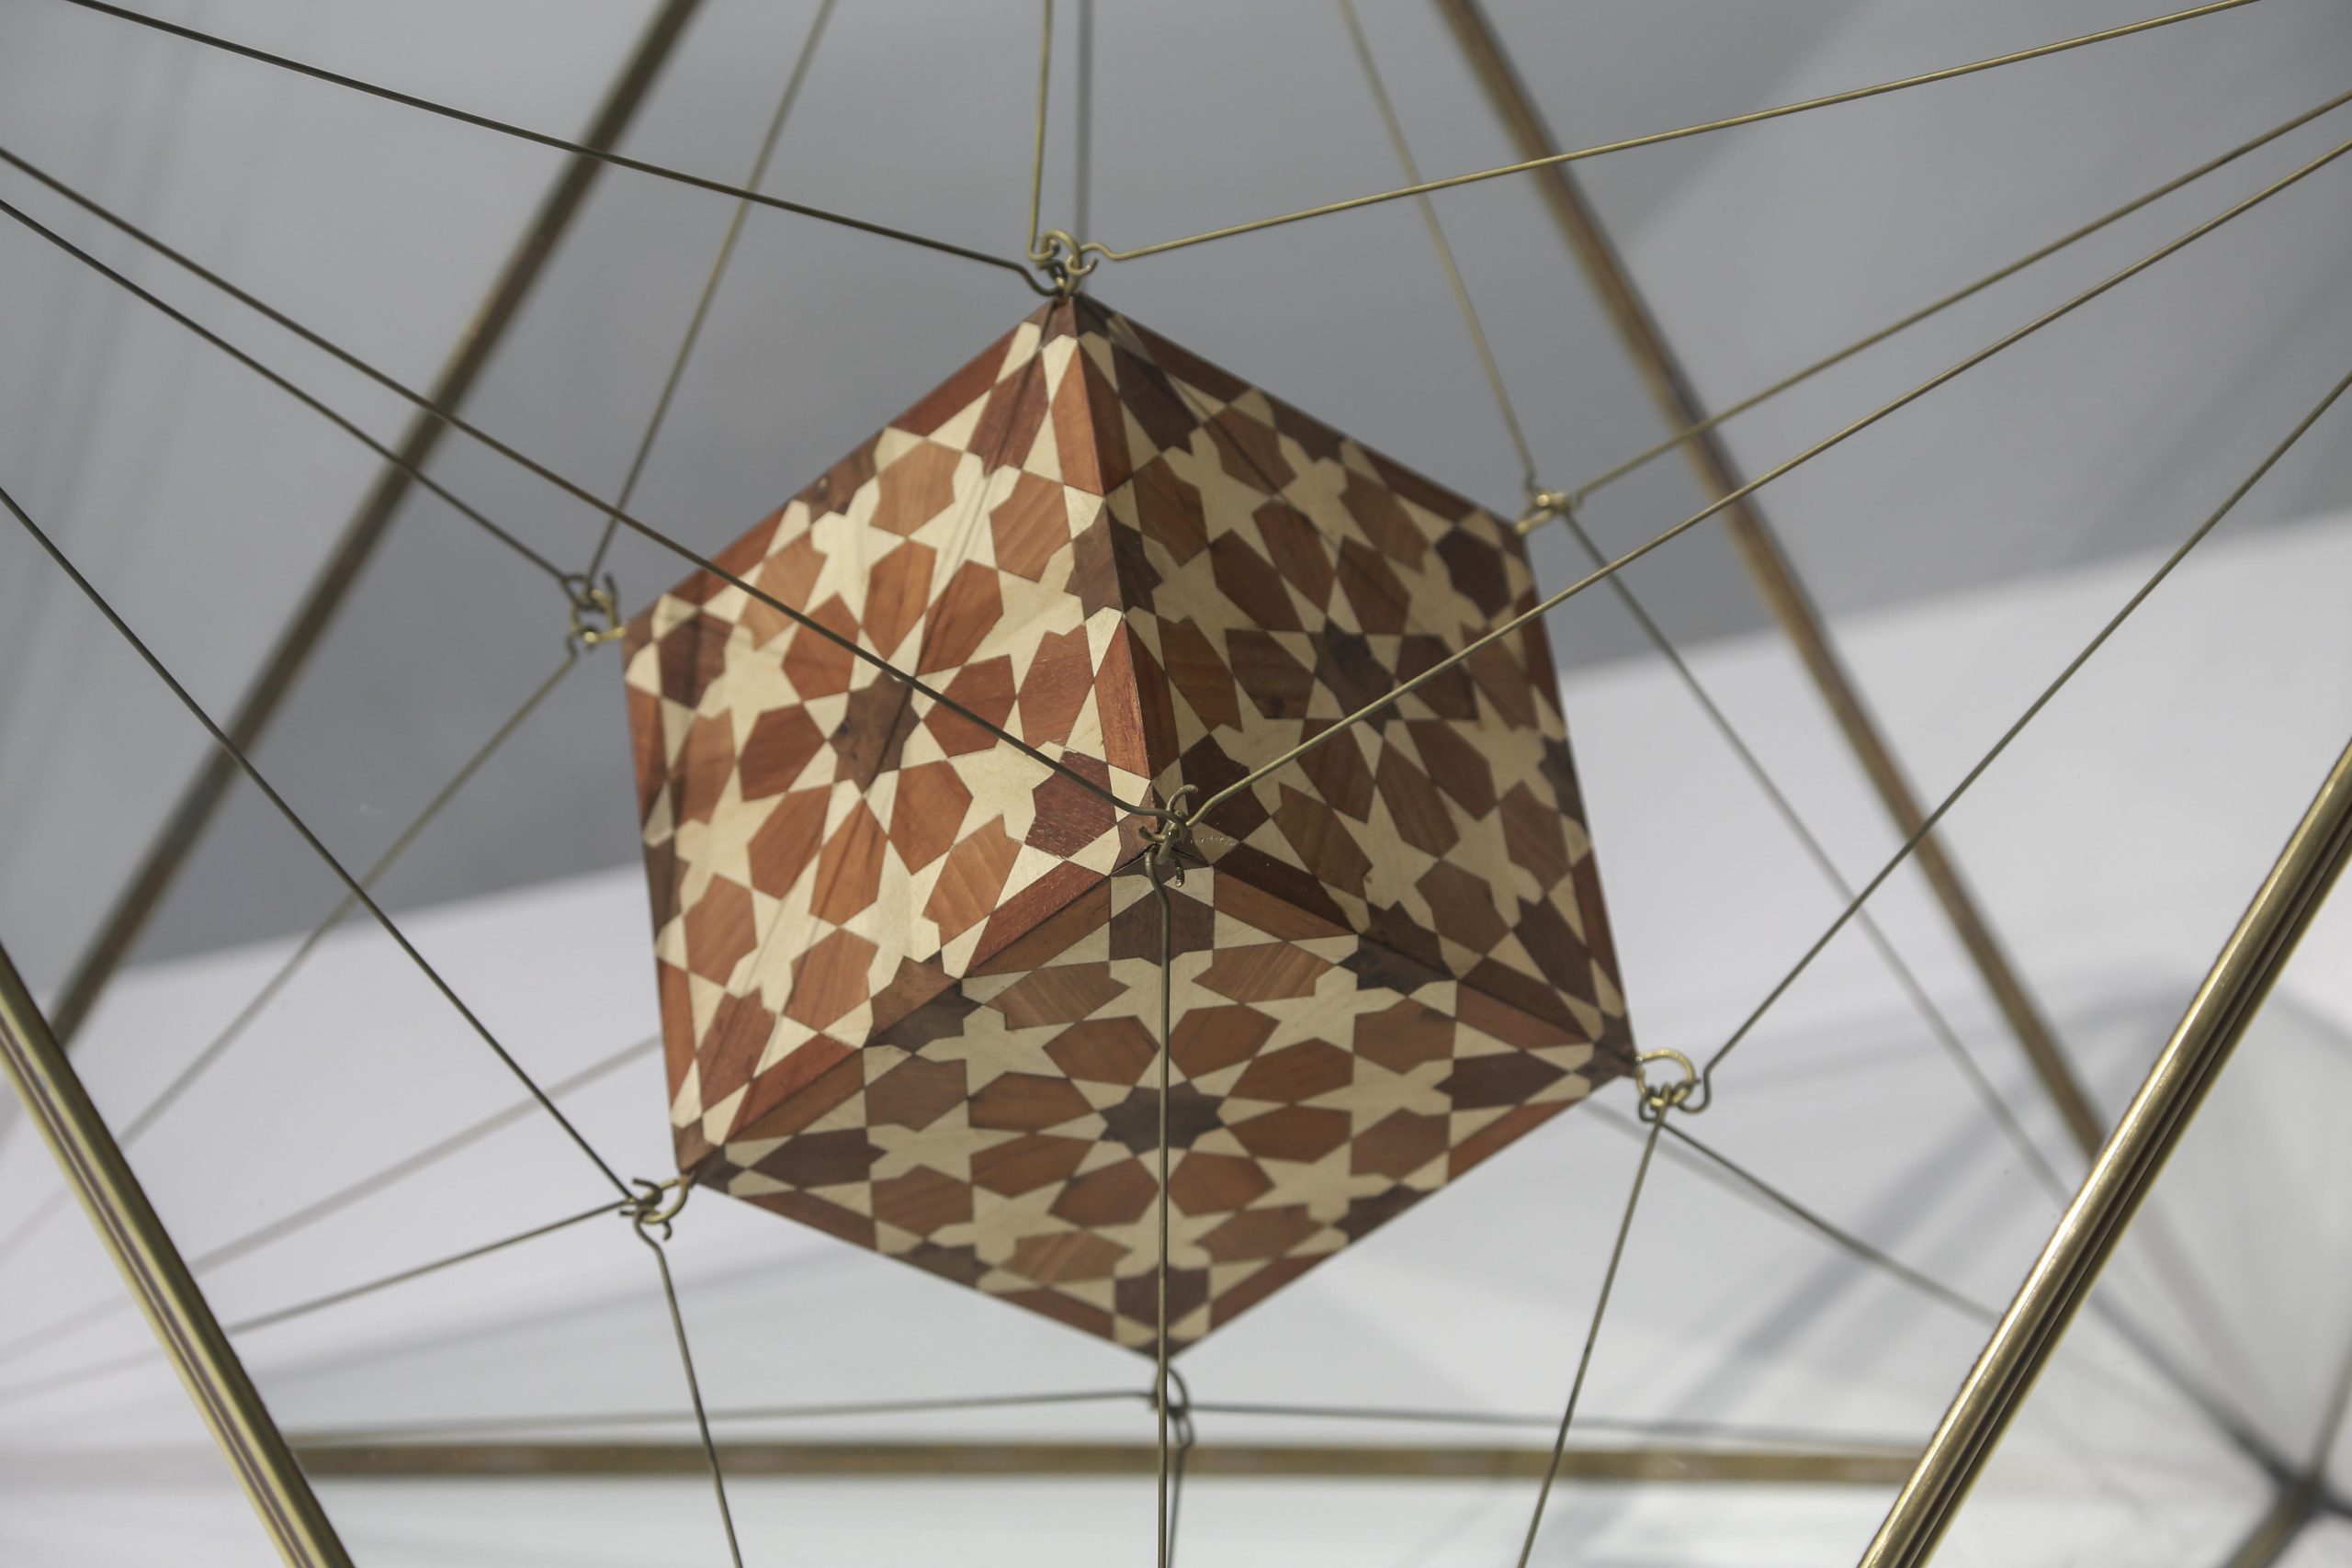 Detail of Cube Within an Octahedron II from The Platonic Solid Duals series, 2019, Wood, copper and brass, 121 x 100.2 x 100.2 cm. Image courtesy of Maraya Art Centre.